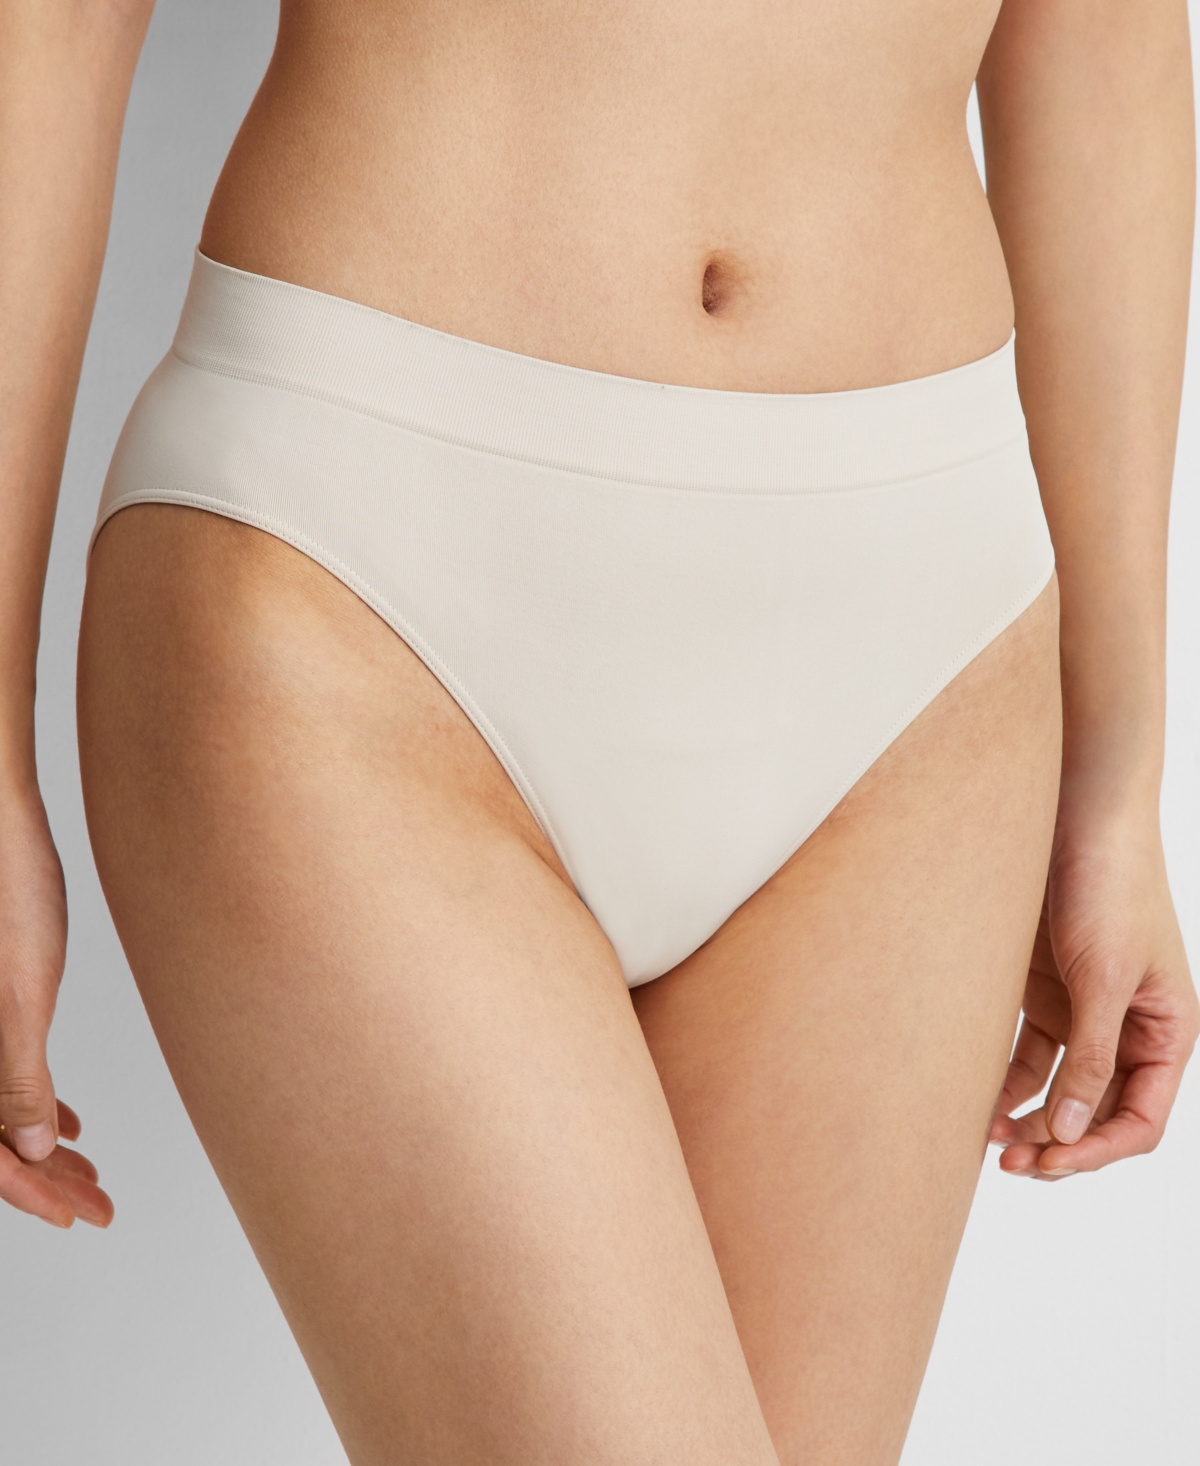 State Of Day Women's Seamless High-cut Underwear, Created For Macy's In Cashmere Cream